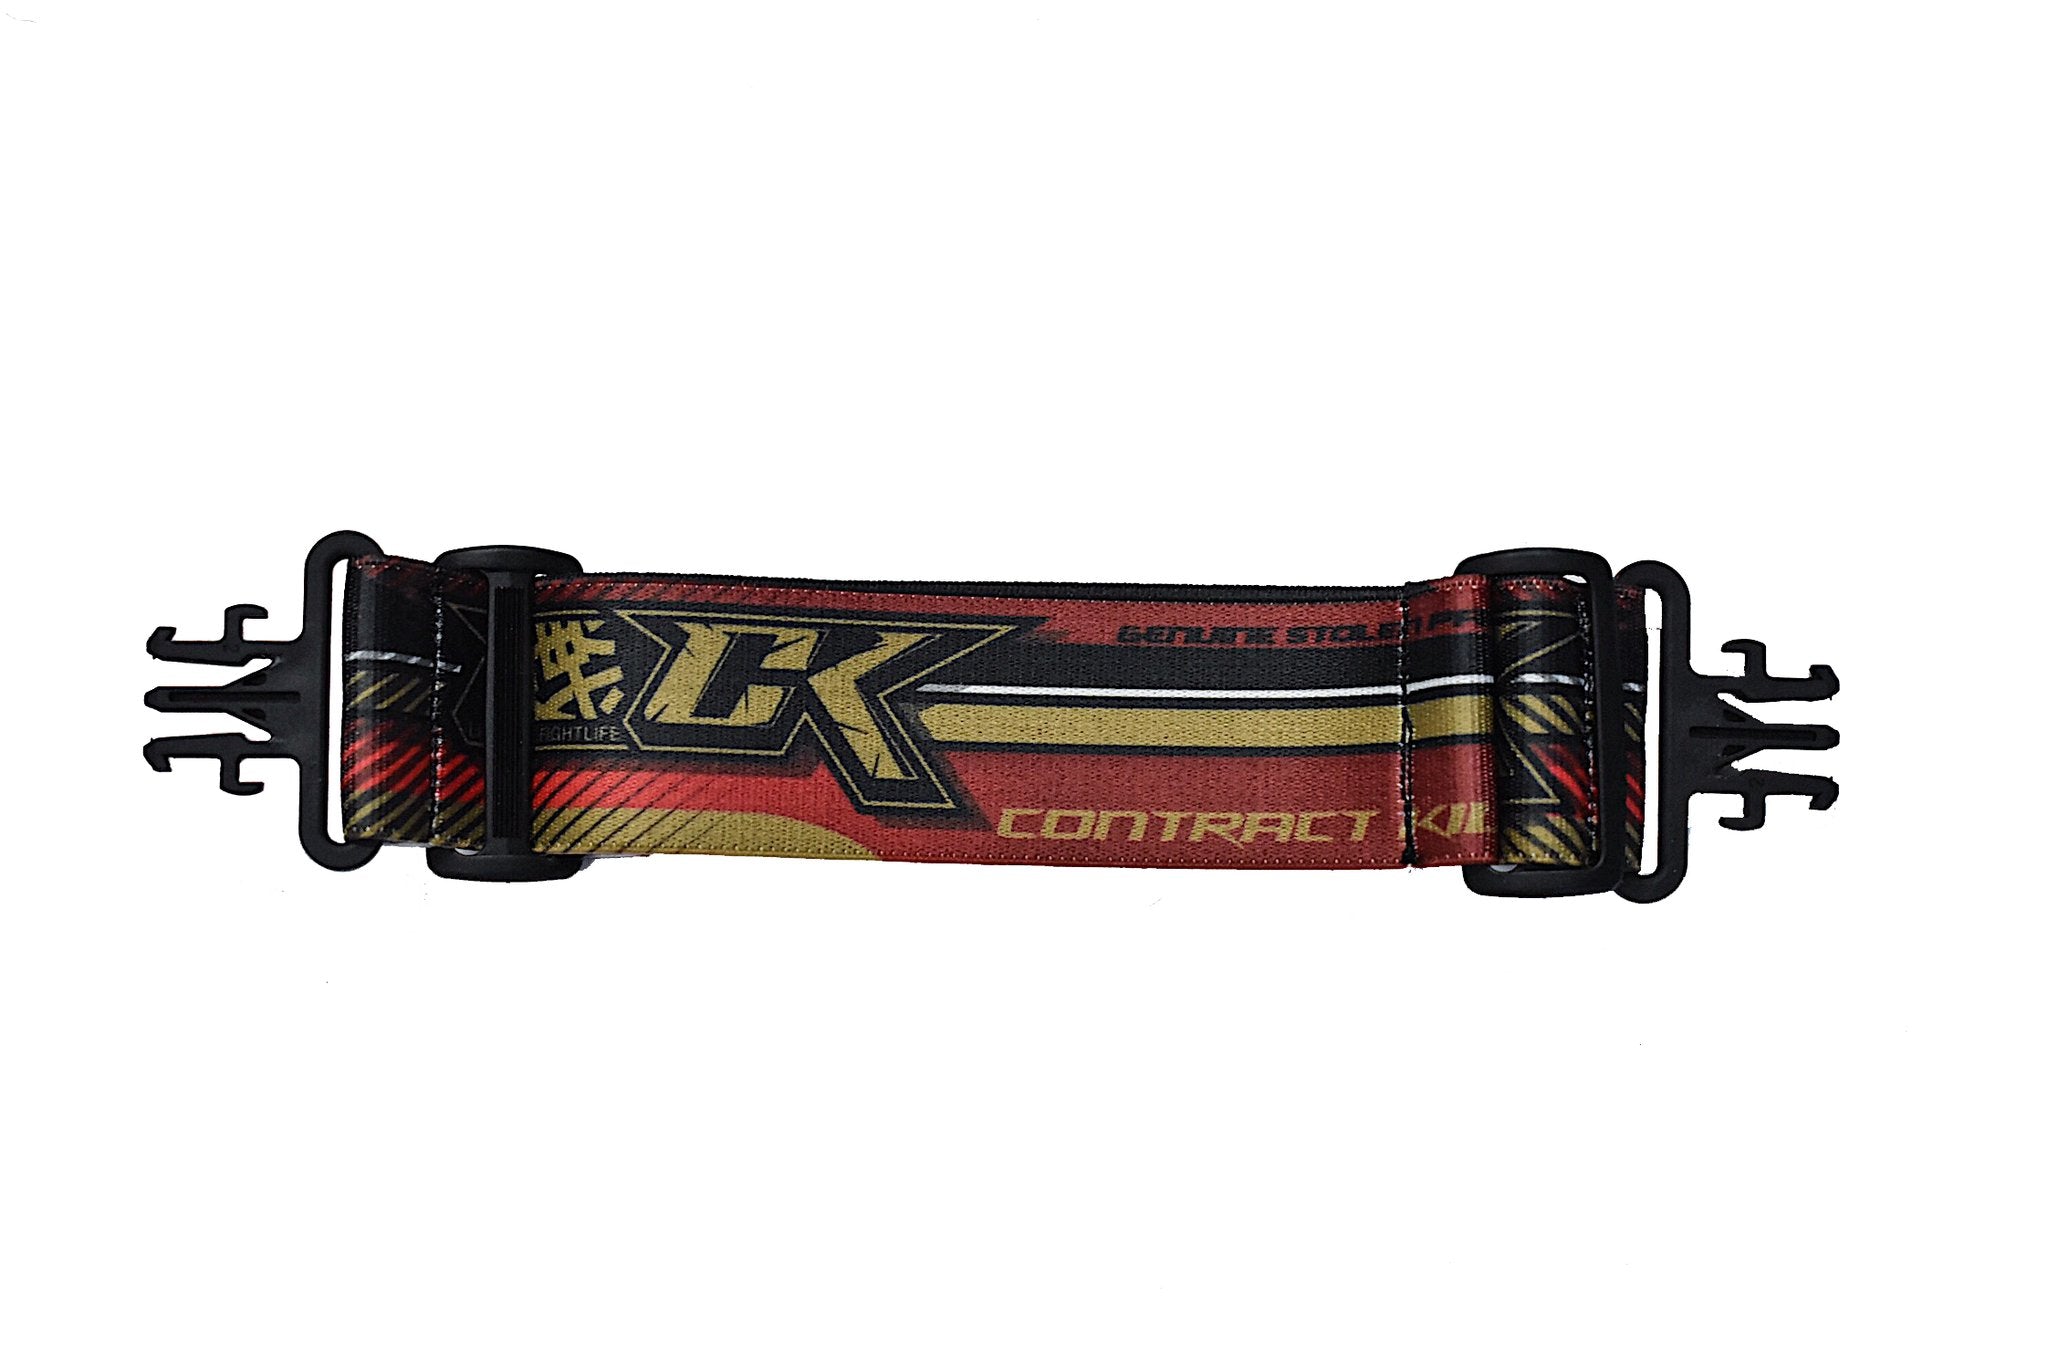 NEW 2022 CK Paintball Goggle Strap RHINO (V-FORCE STYLE)